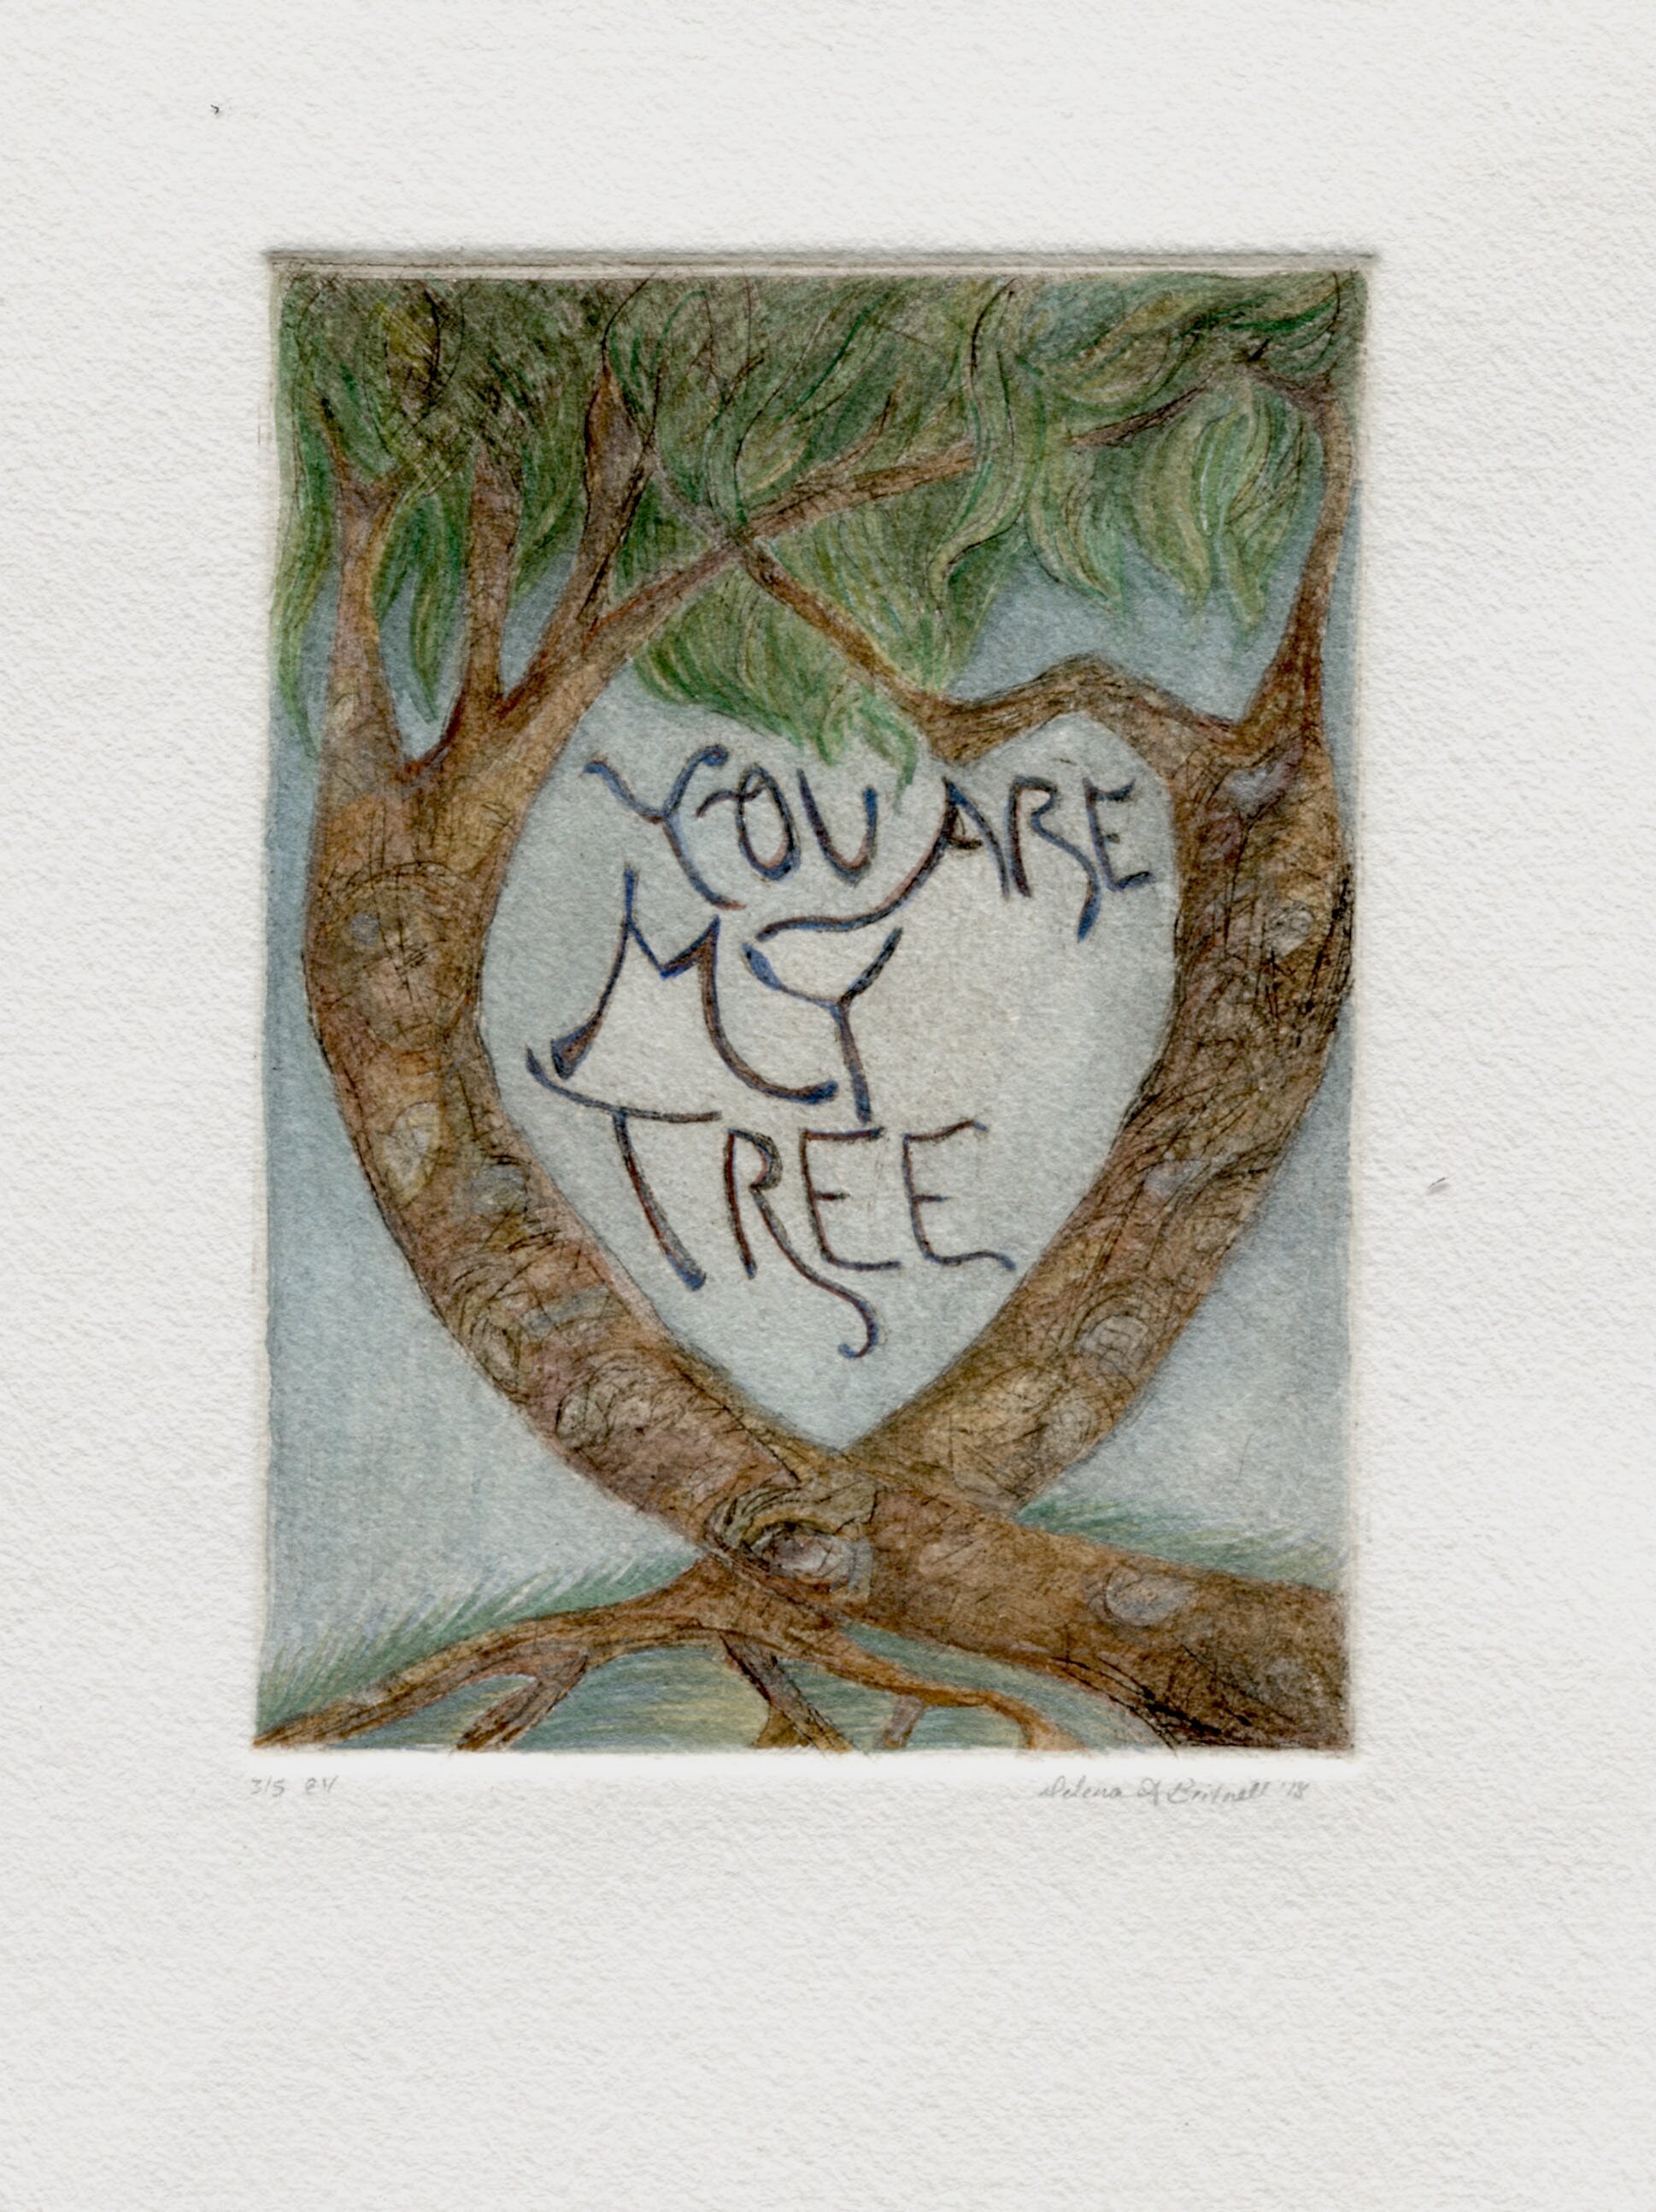 You are my tree 3/5 Varied Edition 